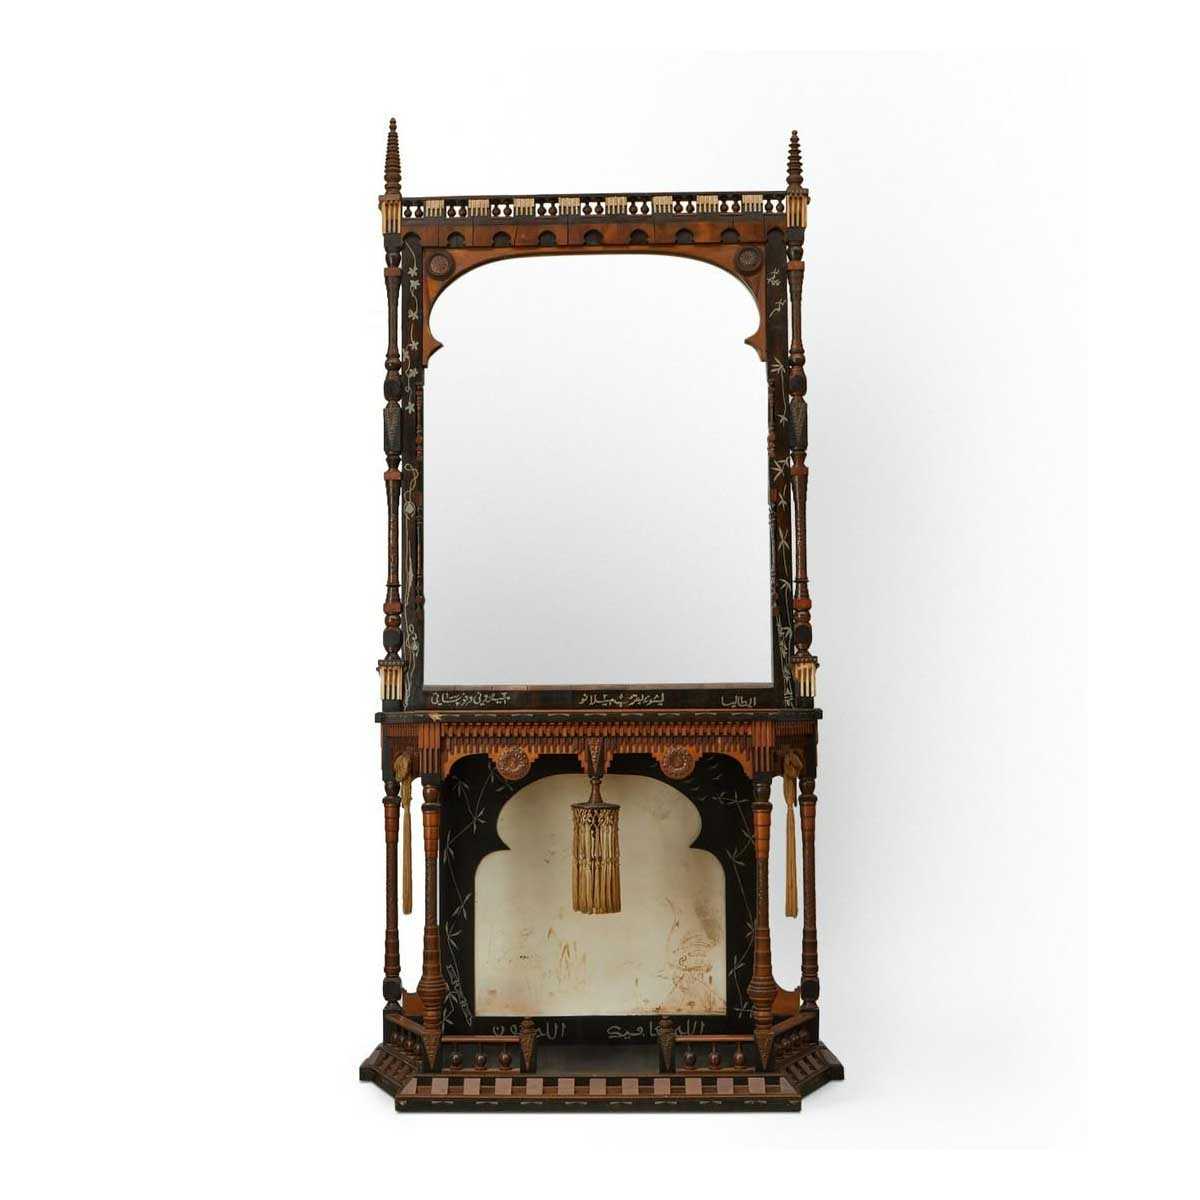 Large Orientalist pier mirror by Carlo Bugatti and Eugenio Quarti, which sold for $32,000 plus the buyer’s premium in August 2022. Image courtesy of Revere Auctions and LiveAuctioneers.